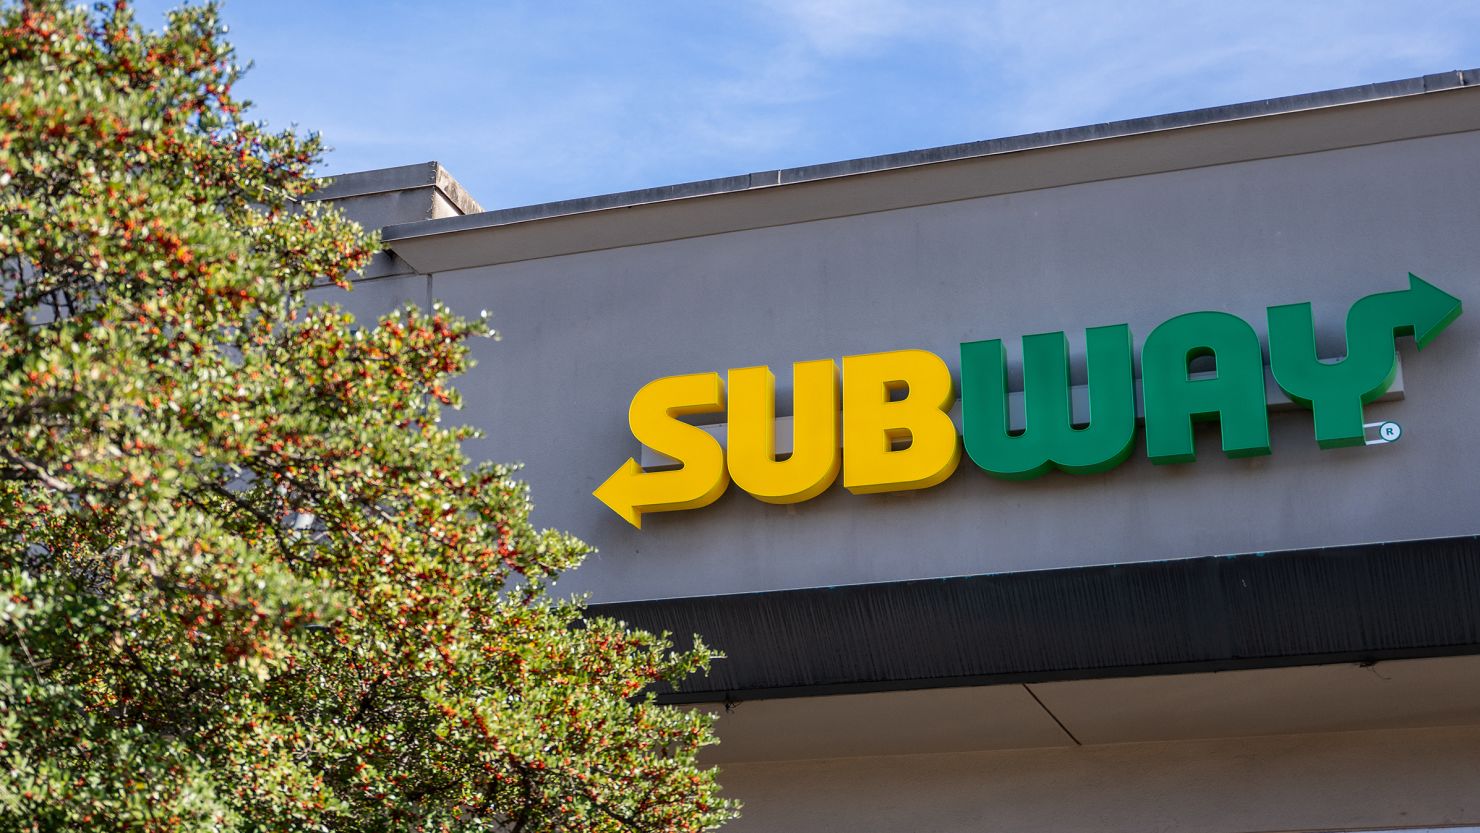 Why go by Mike or Suzy or Avery when you can re-christen yourself "Subway" and possibly win sandwiches for life?